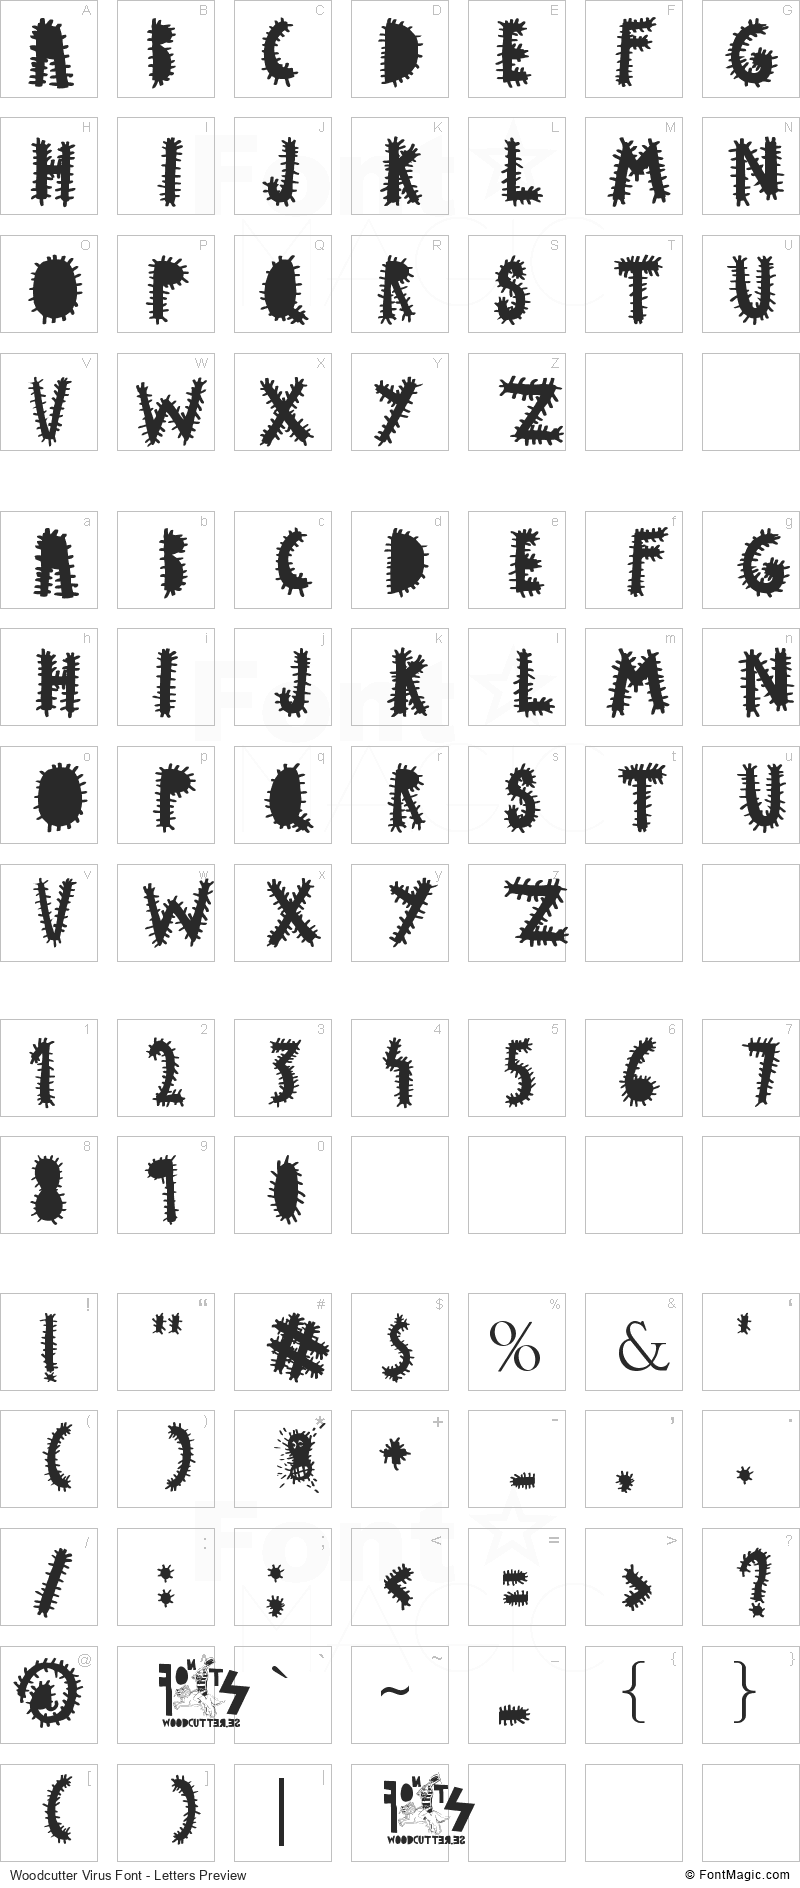 Woodcutter Virus Font - All Latters Preview Chart